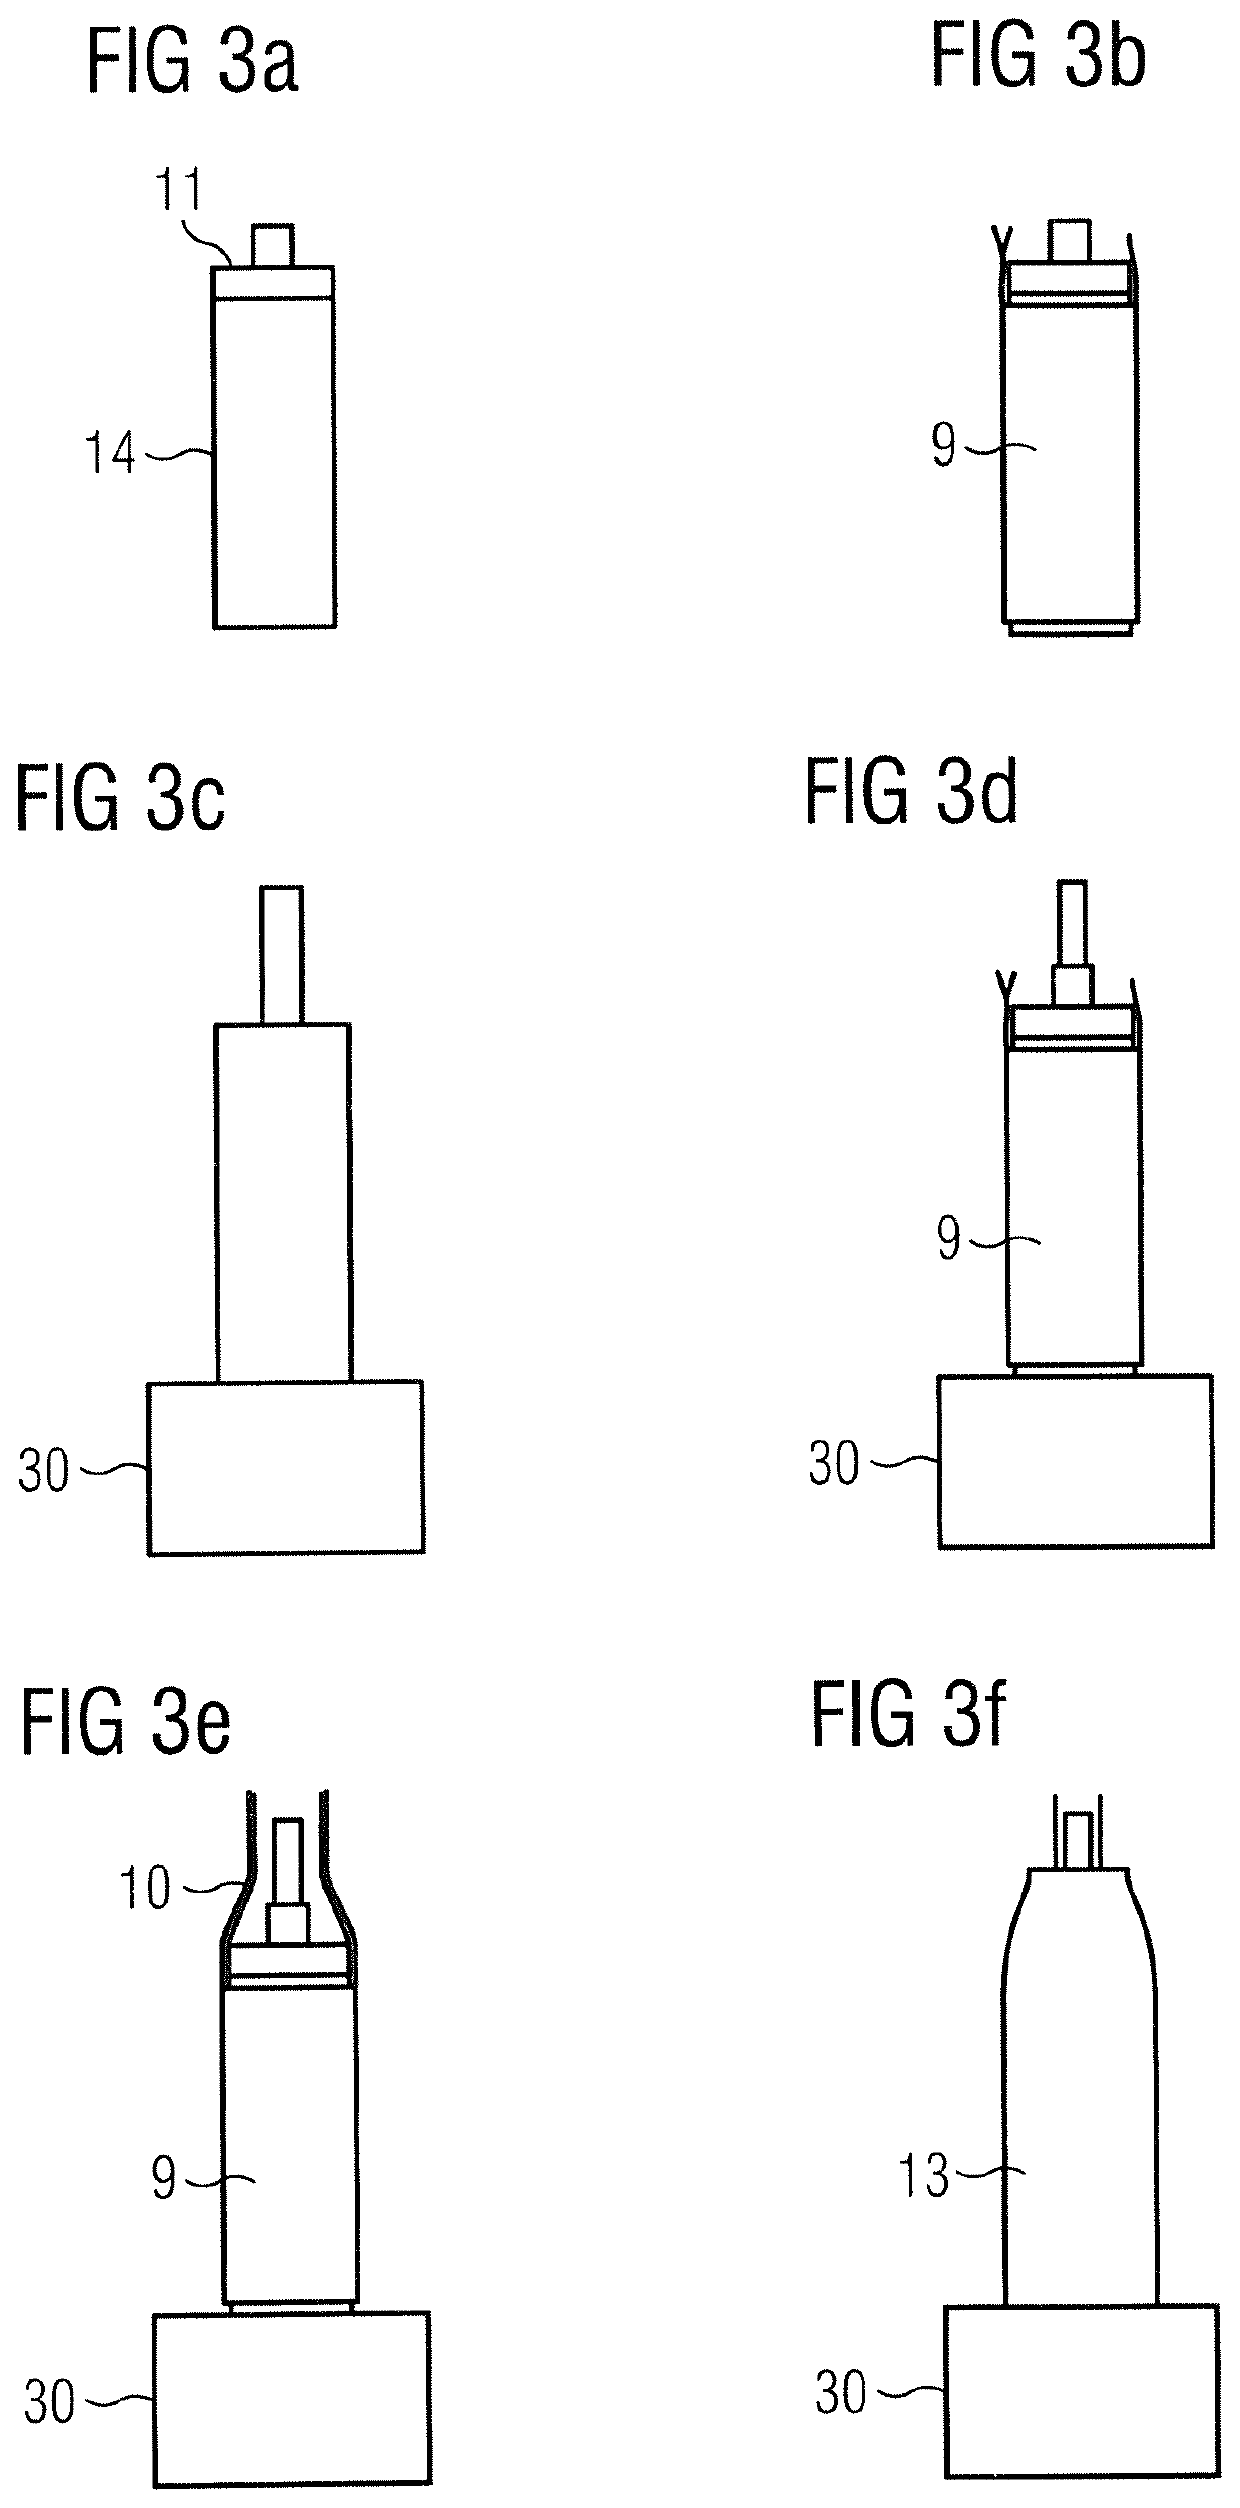 Method of manufacturing a blood pump